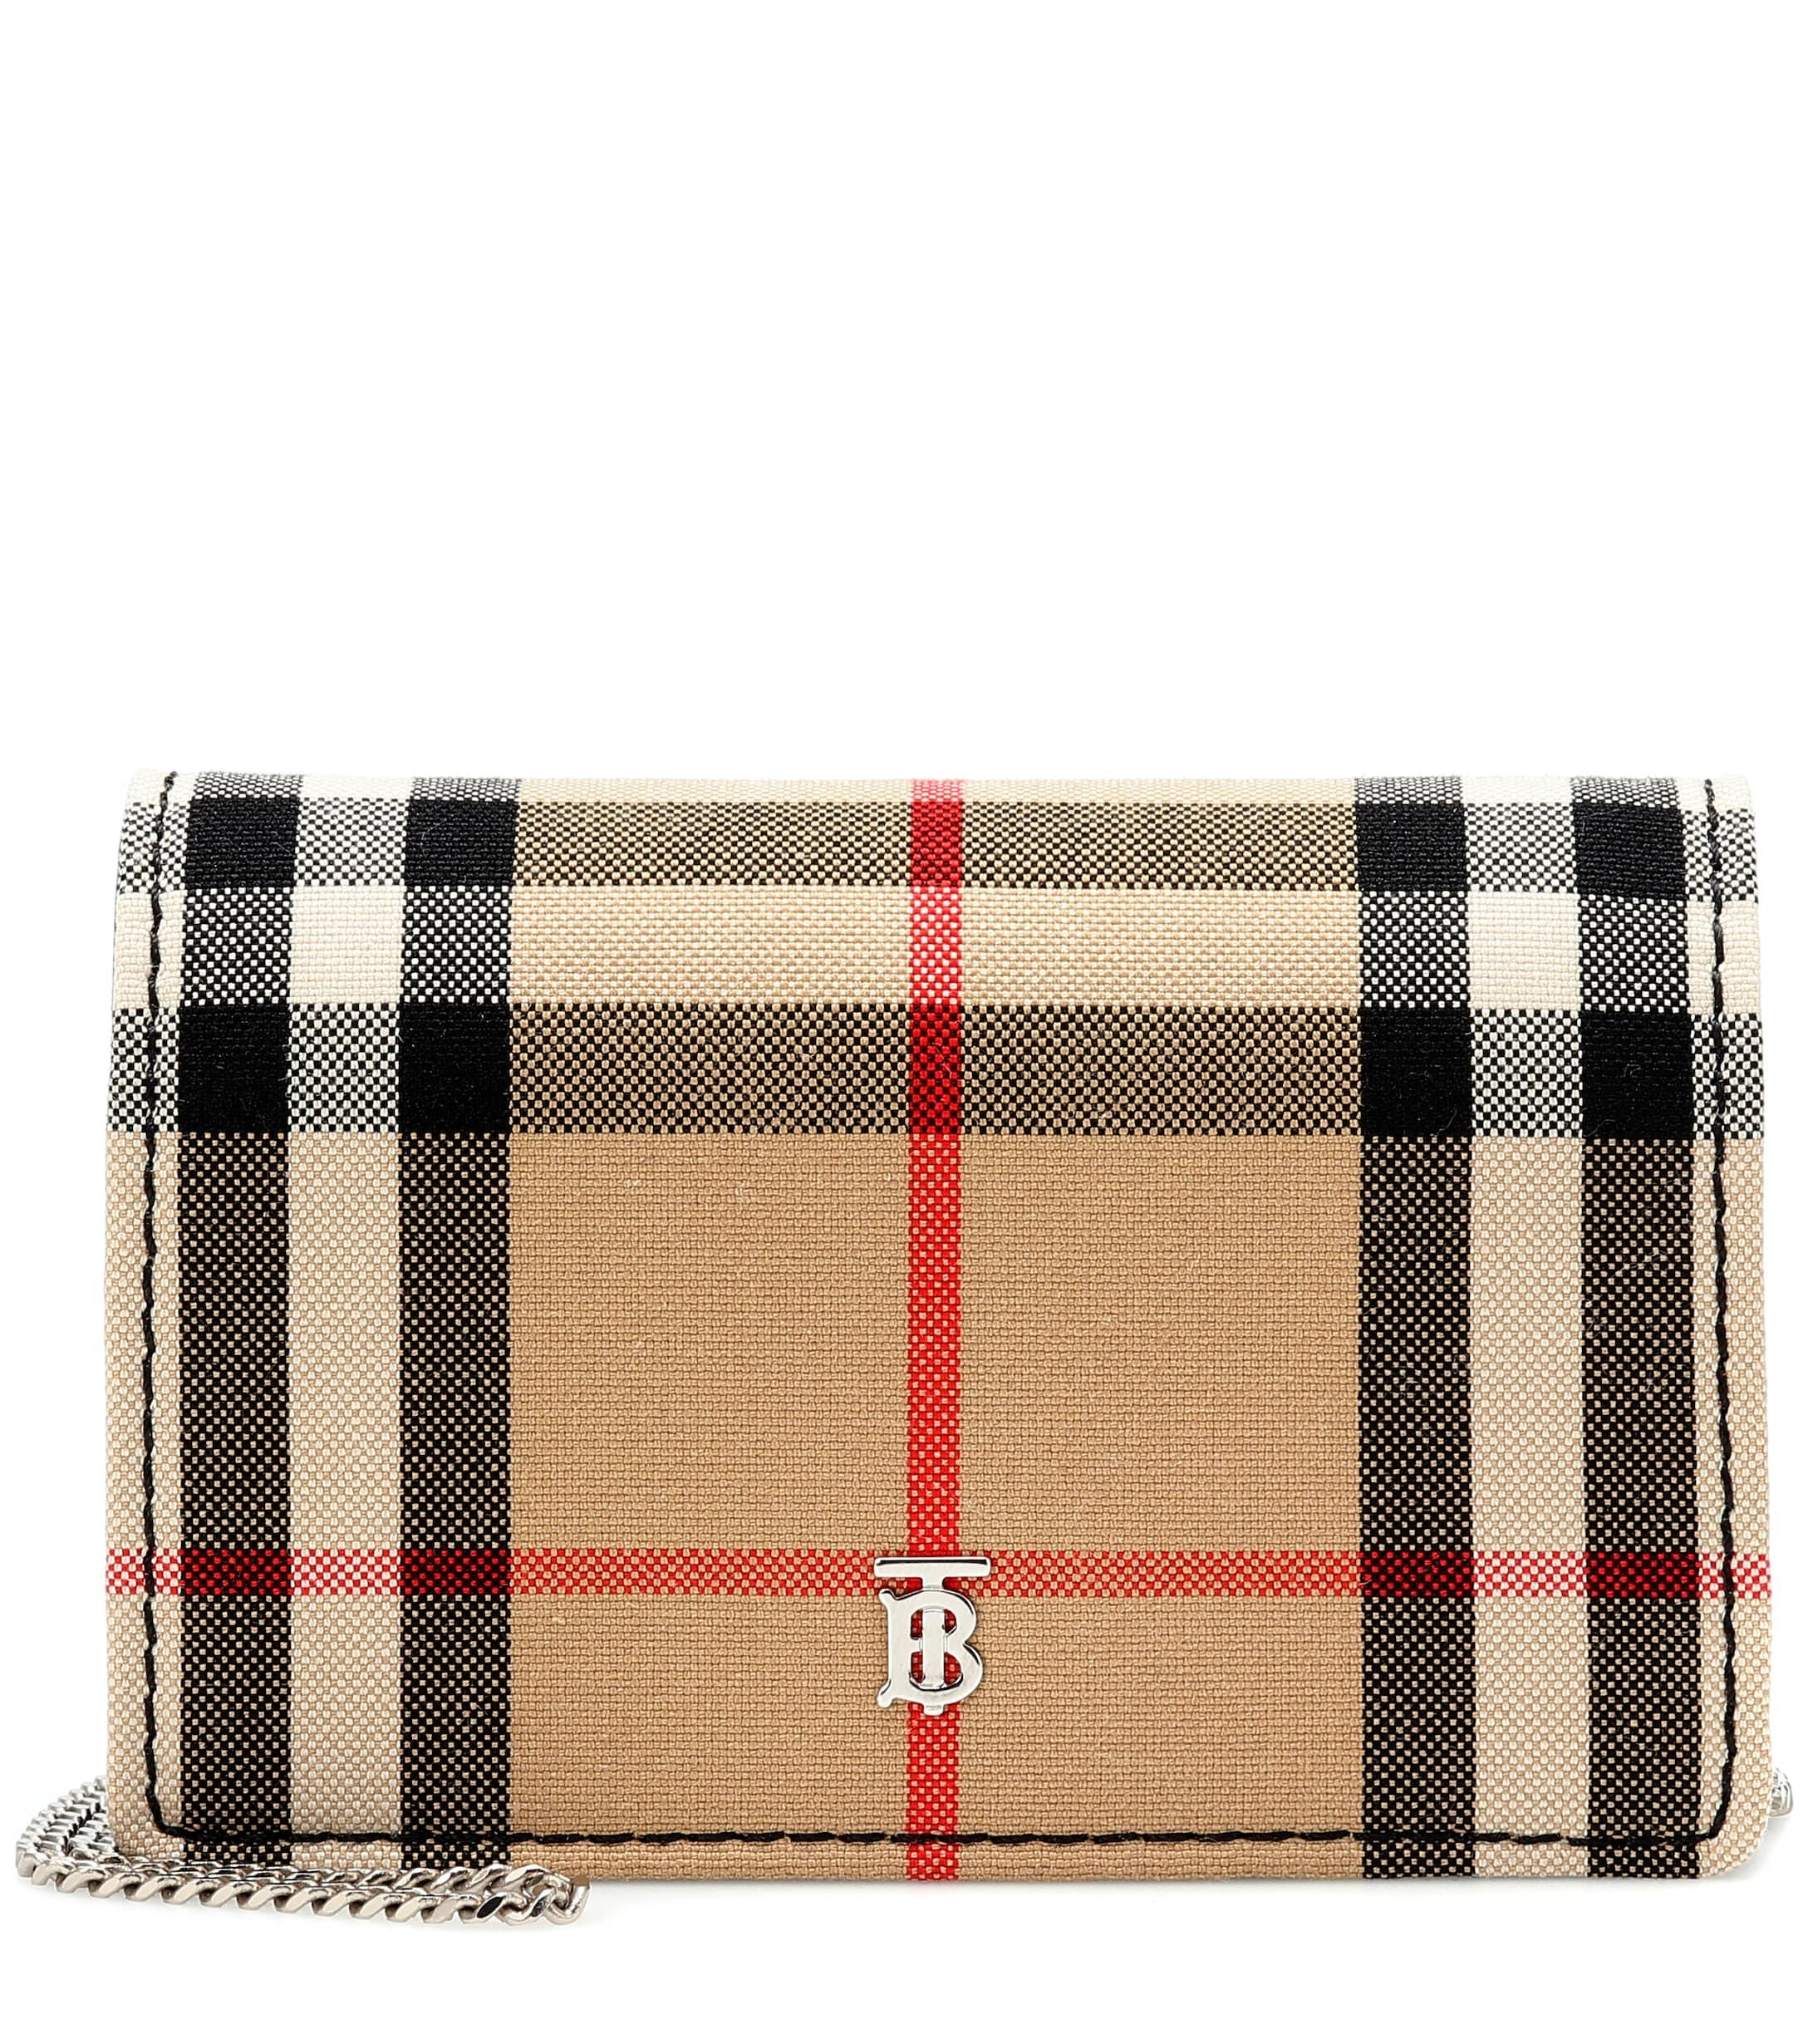 Burberry Card Holder - Lyst - Burberry Check Card Holder in Black for ...